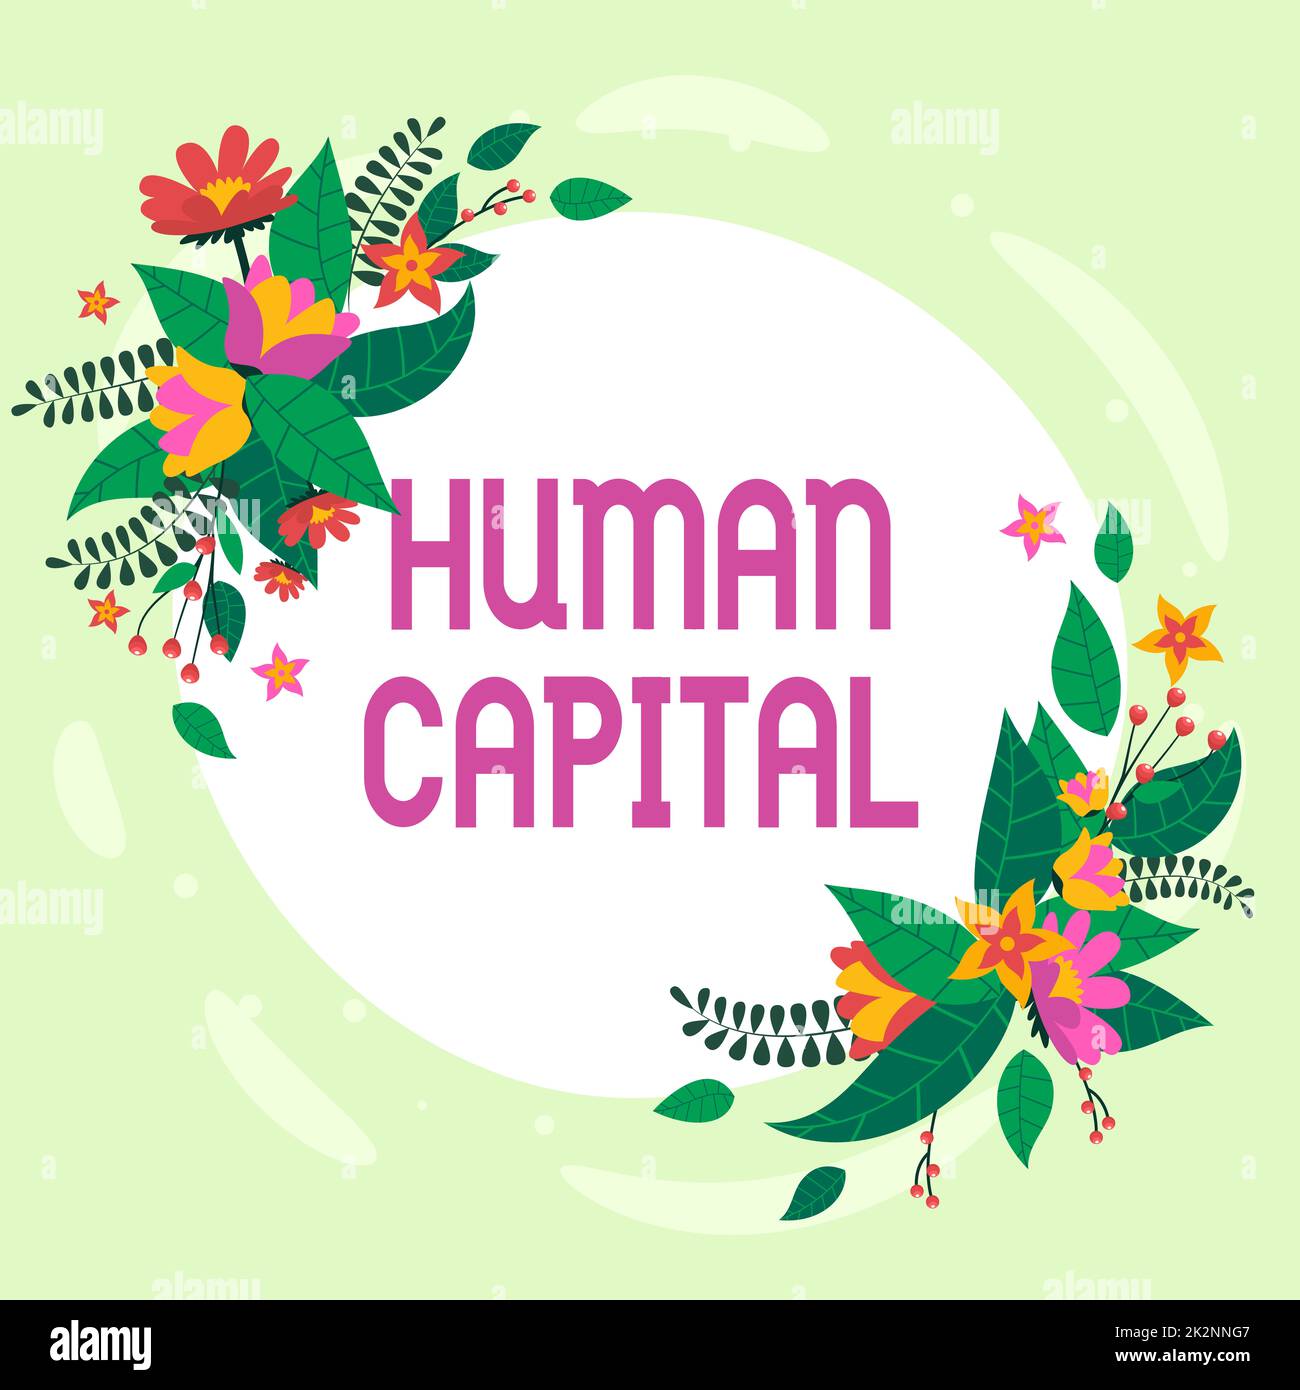 Conceptual caption Human Capital. Internet Concept Intangible Collective Resources Competence Capital Education Blank Frame Decorated With Abstract Modernized Forms Flowers And Foliage. Stock Photo